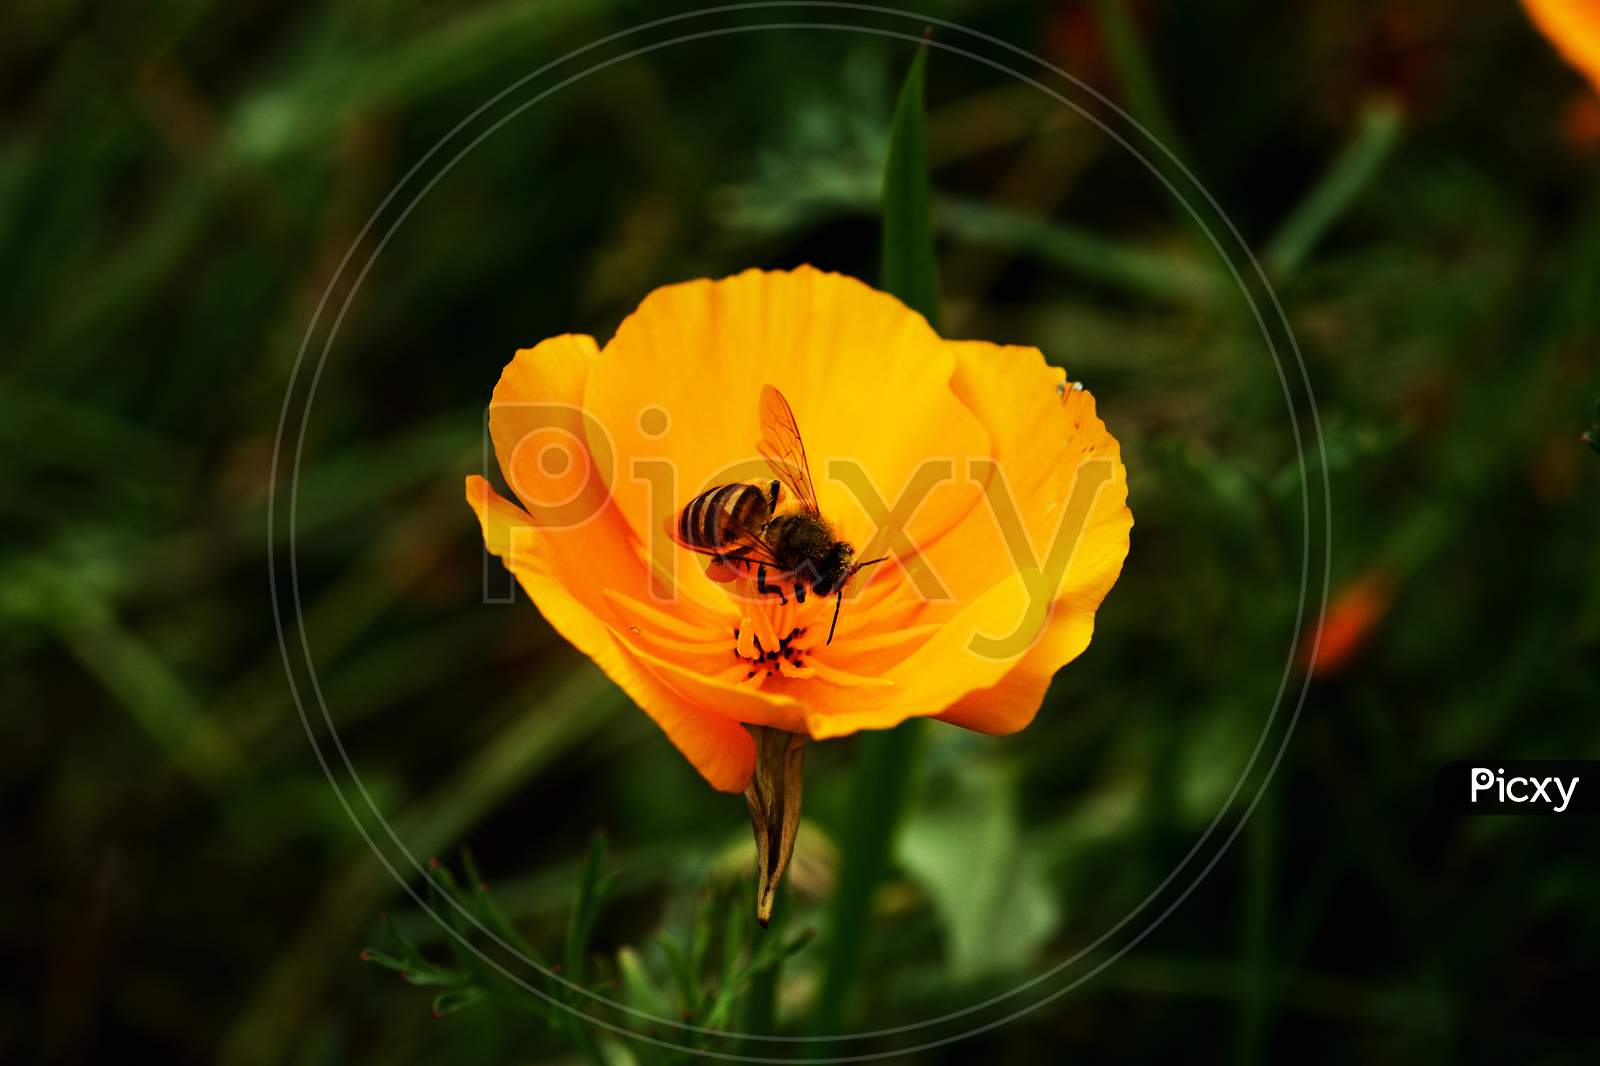 A tiny Bee on  a yellow flower in search of nectar